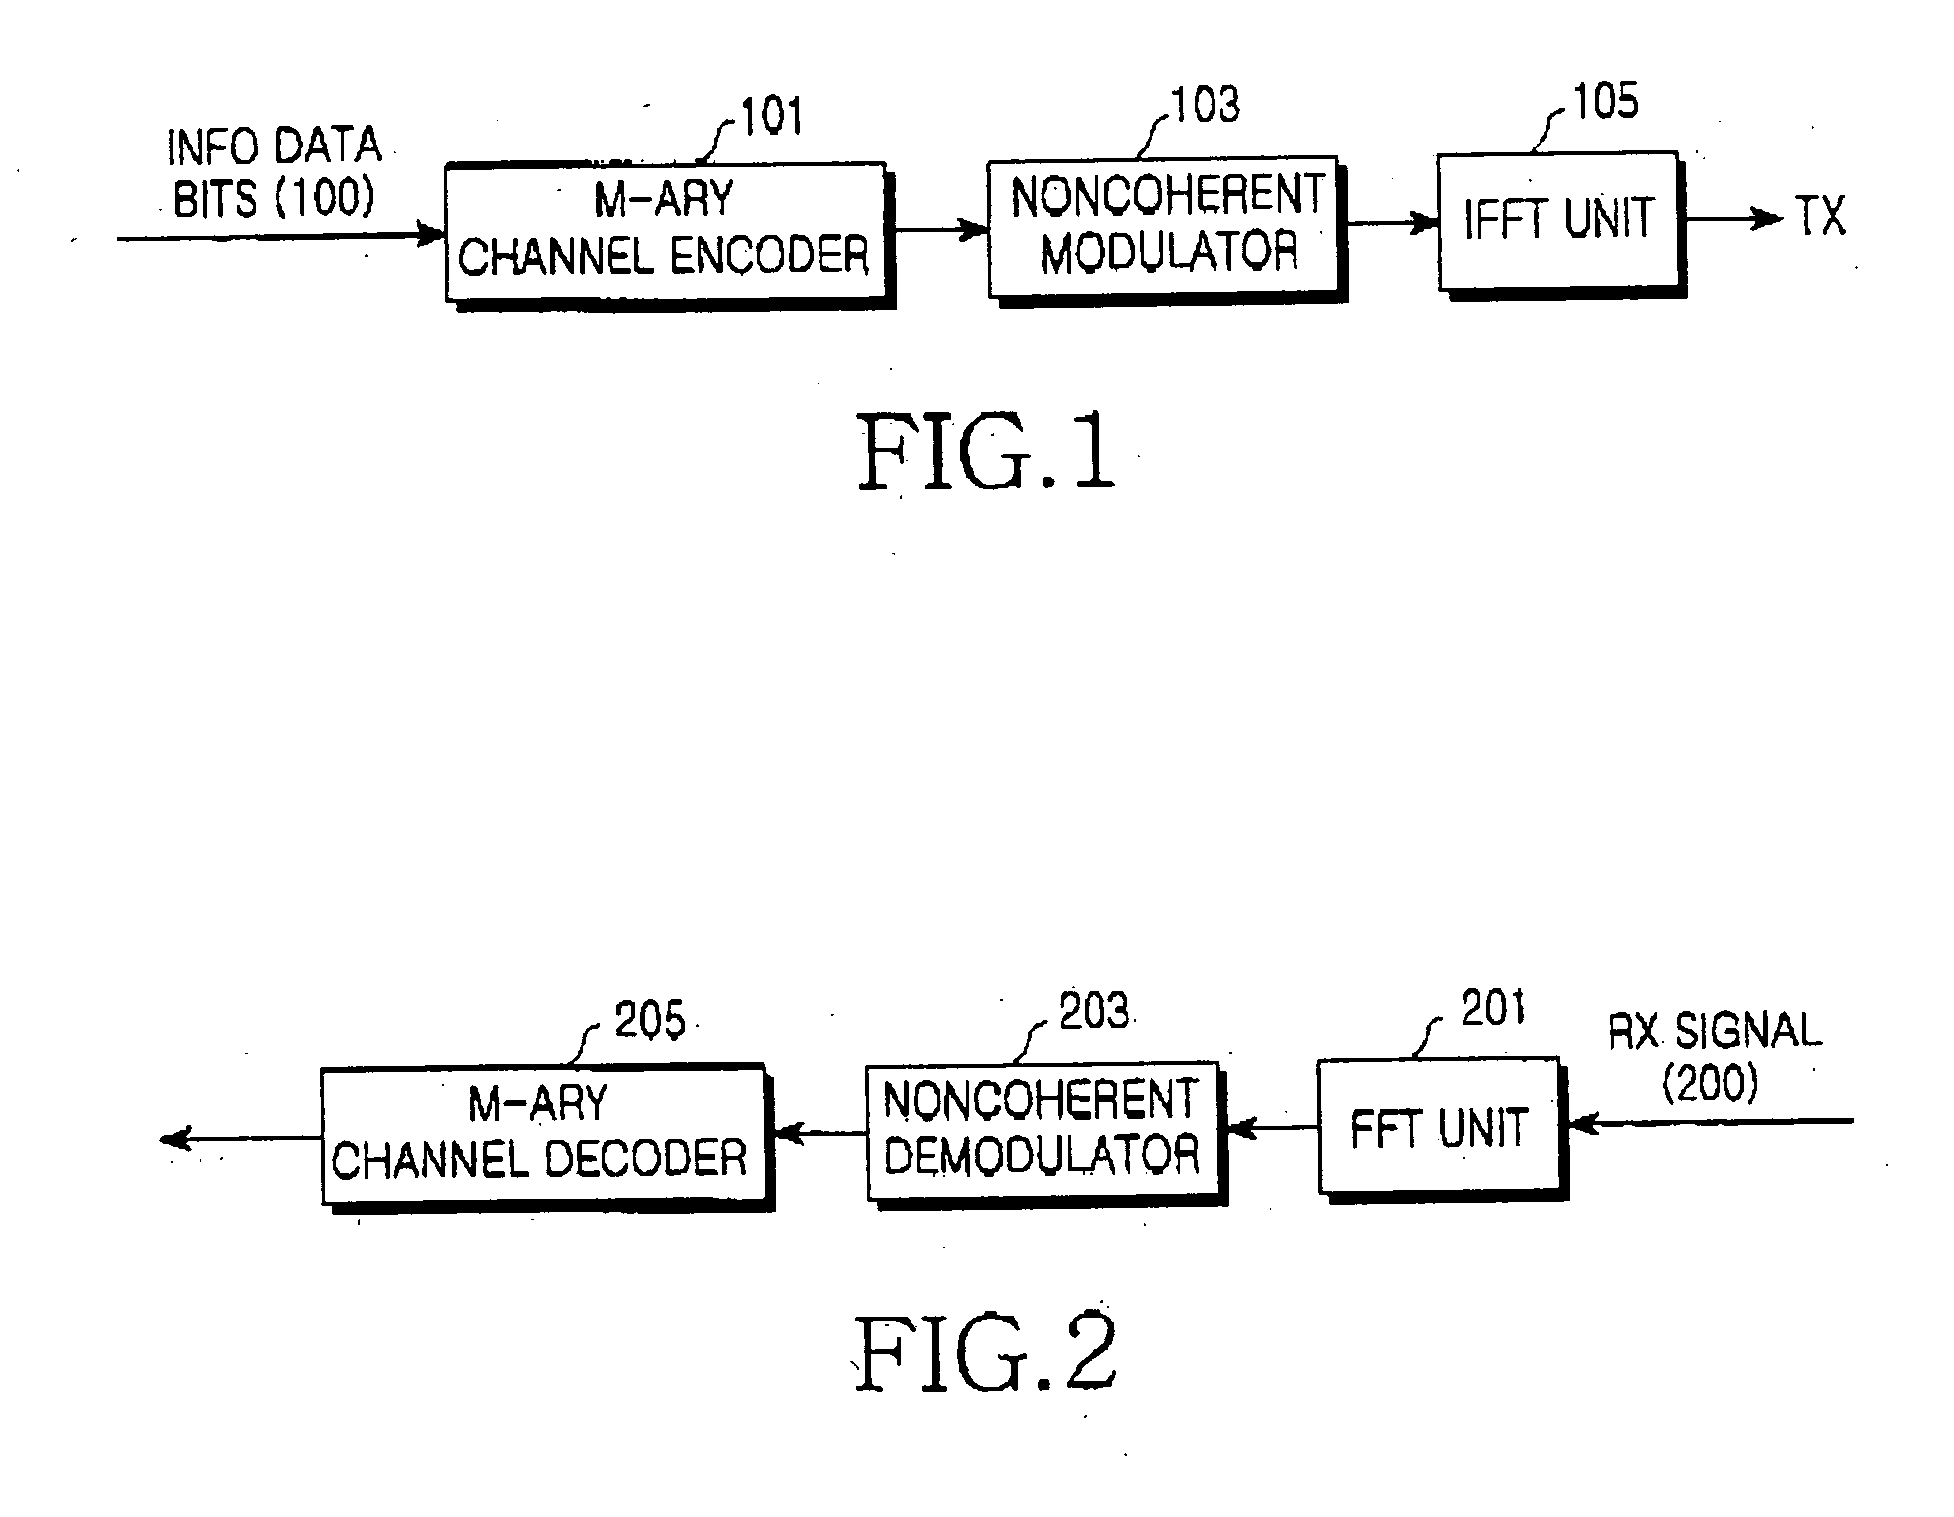 Apparatus and method for transmitting fast feedback information in a wireless communication system